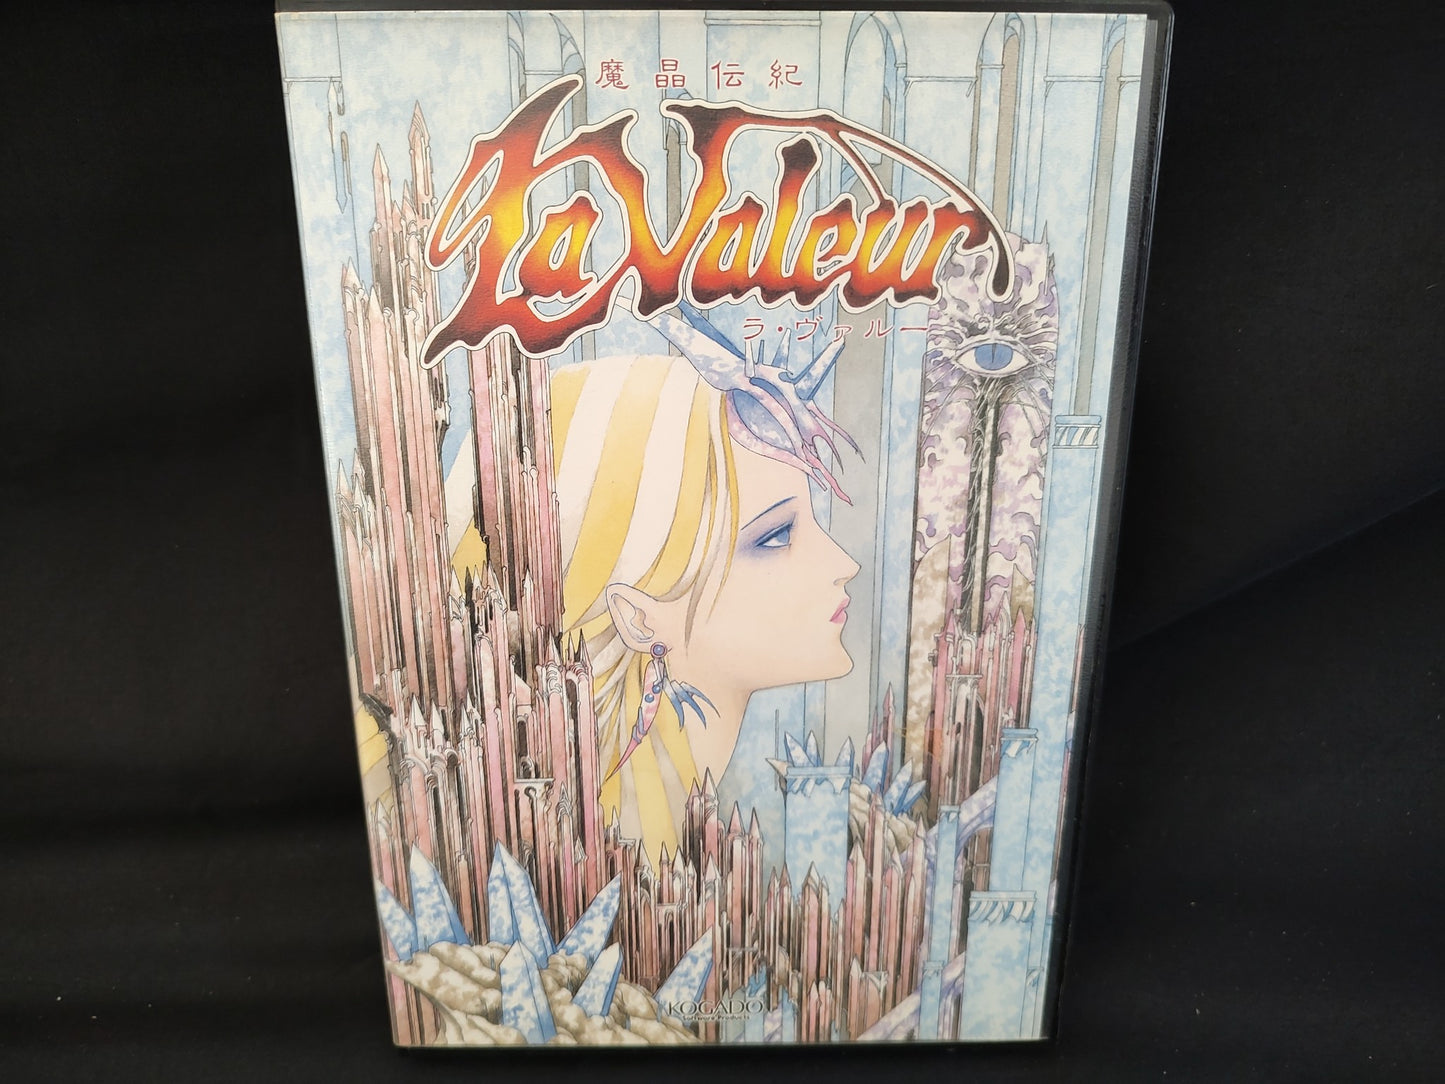 PC-9801 PC98 La Valeur, Game FDDs w/Manual and Box set, Working-f0804-